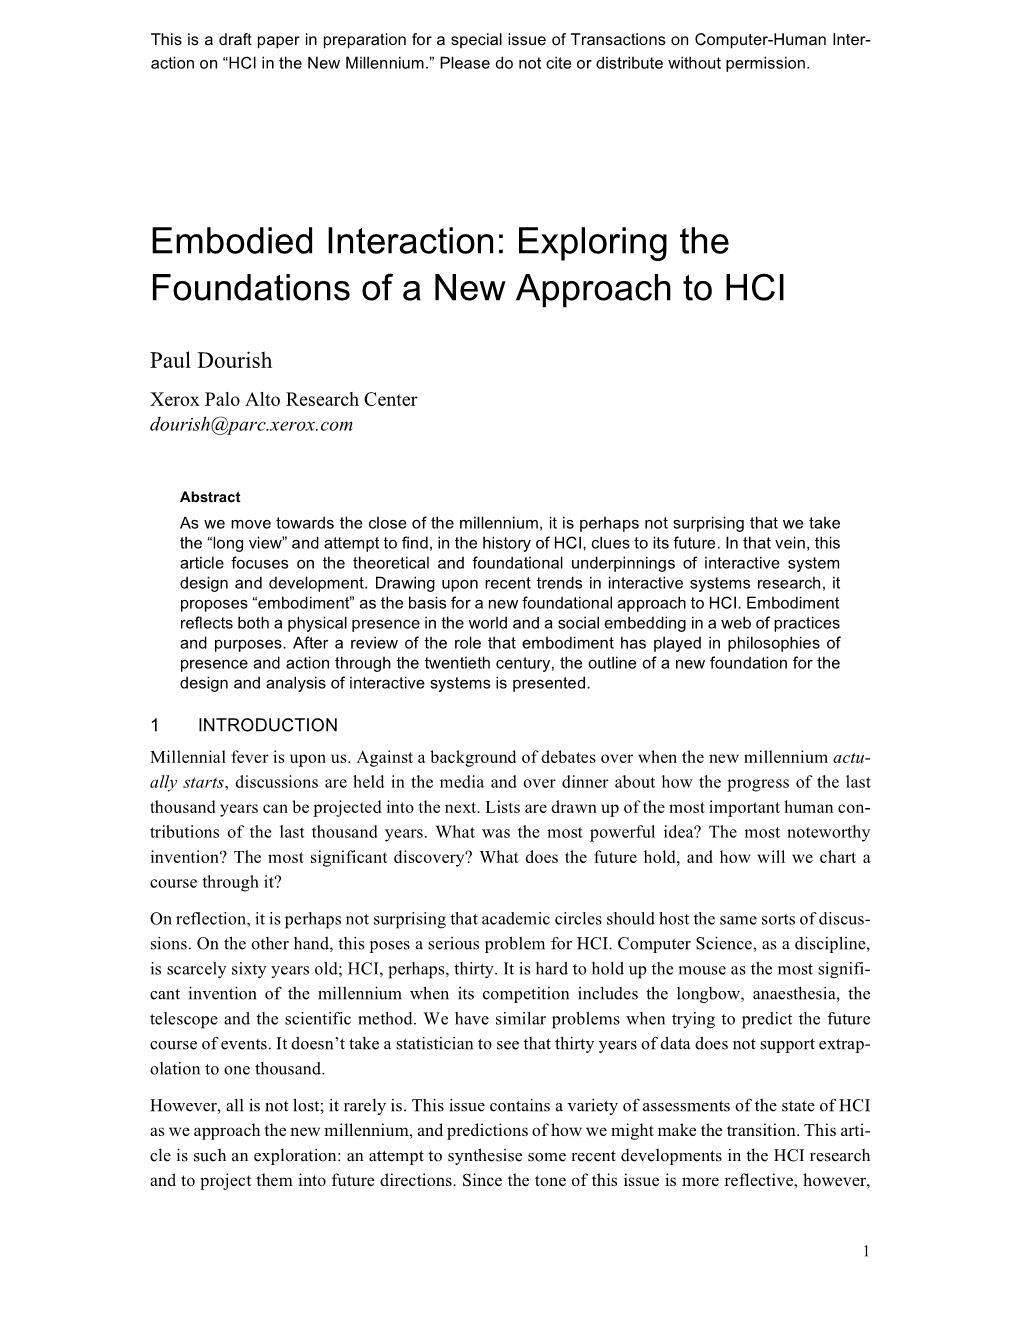 Embodied Interaction: Exploring the Foundations of a New Approach to HCI